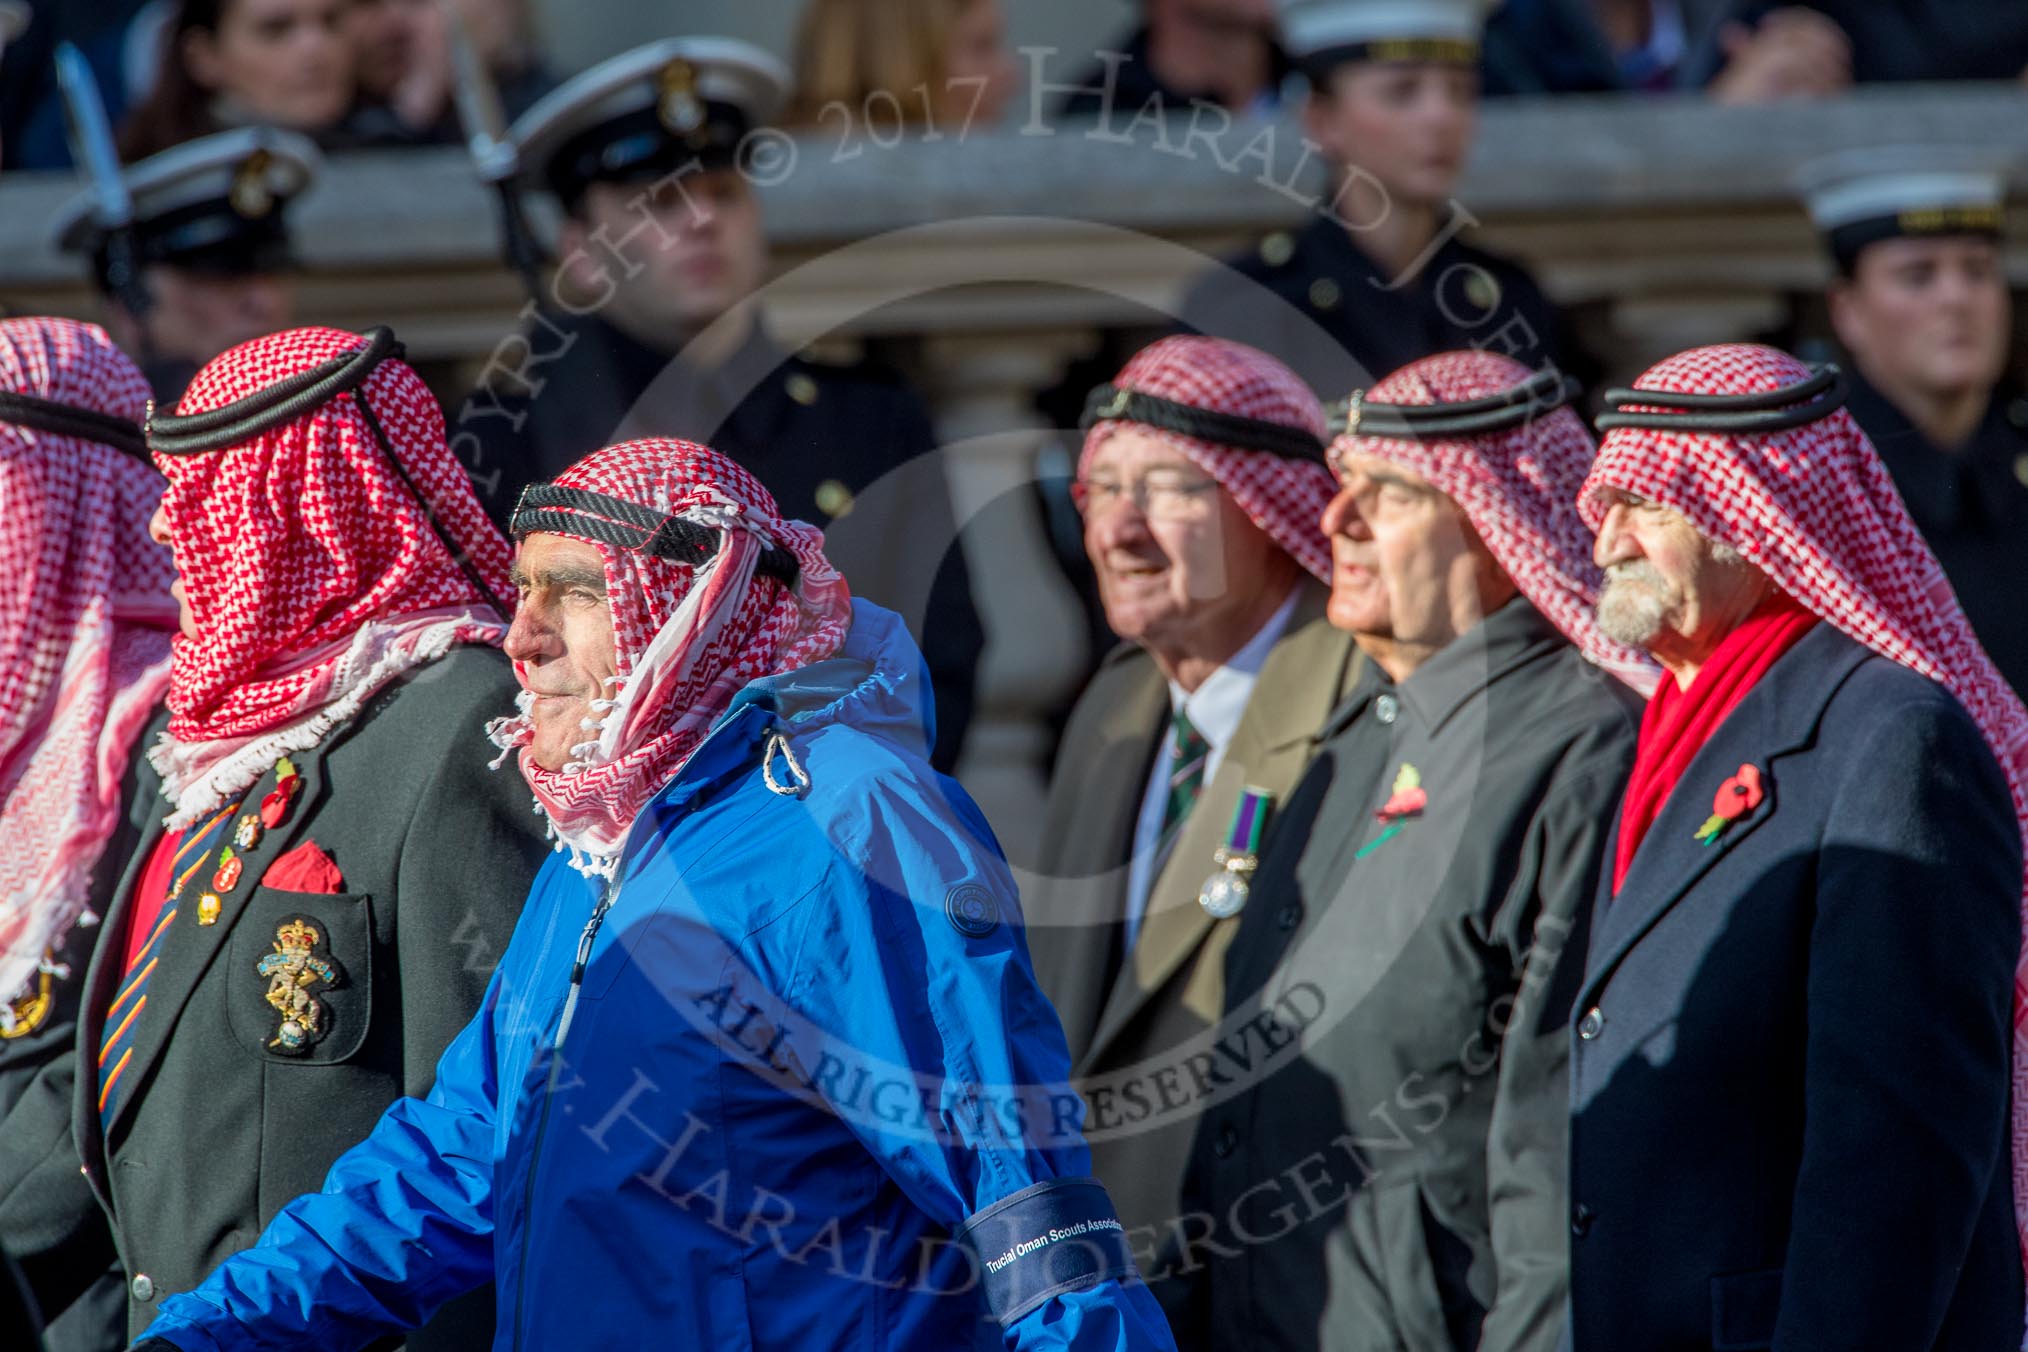 Trucial Oman Scouts Association  (Group D19, 20 members) during the Royal British Legion March Past on Remembrance Sunday at the Cenotaph, Whitehall, Westminster, London, 11 November 2018, 12:23.